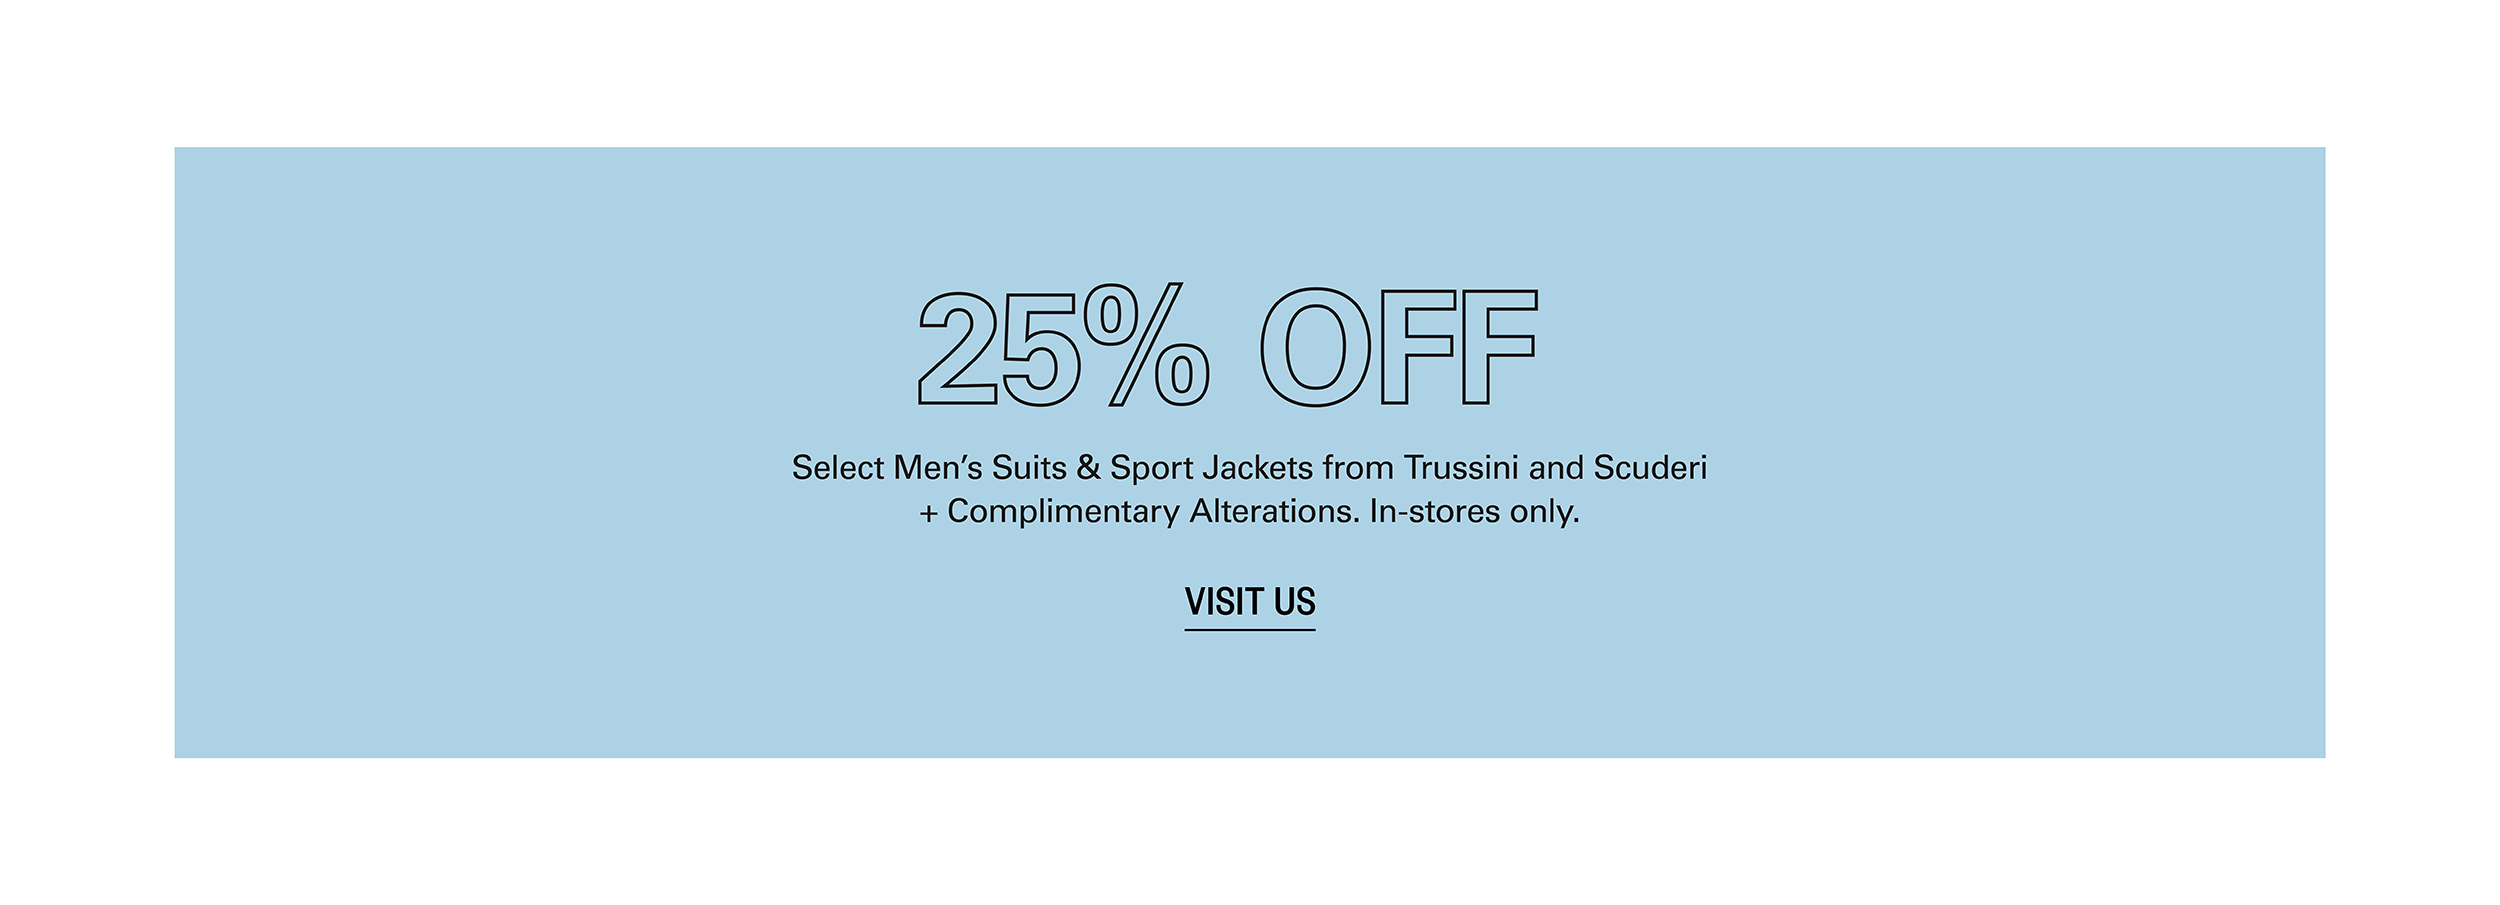 25% off select suits & sport jackets